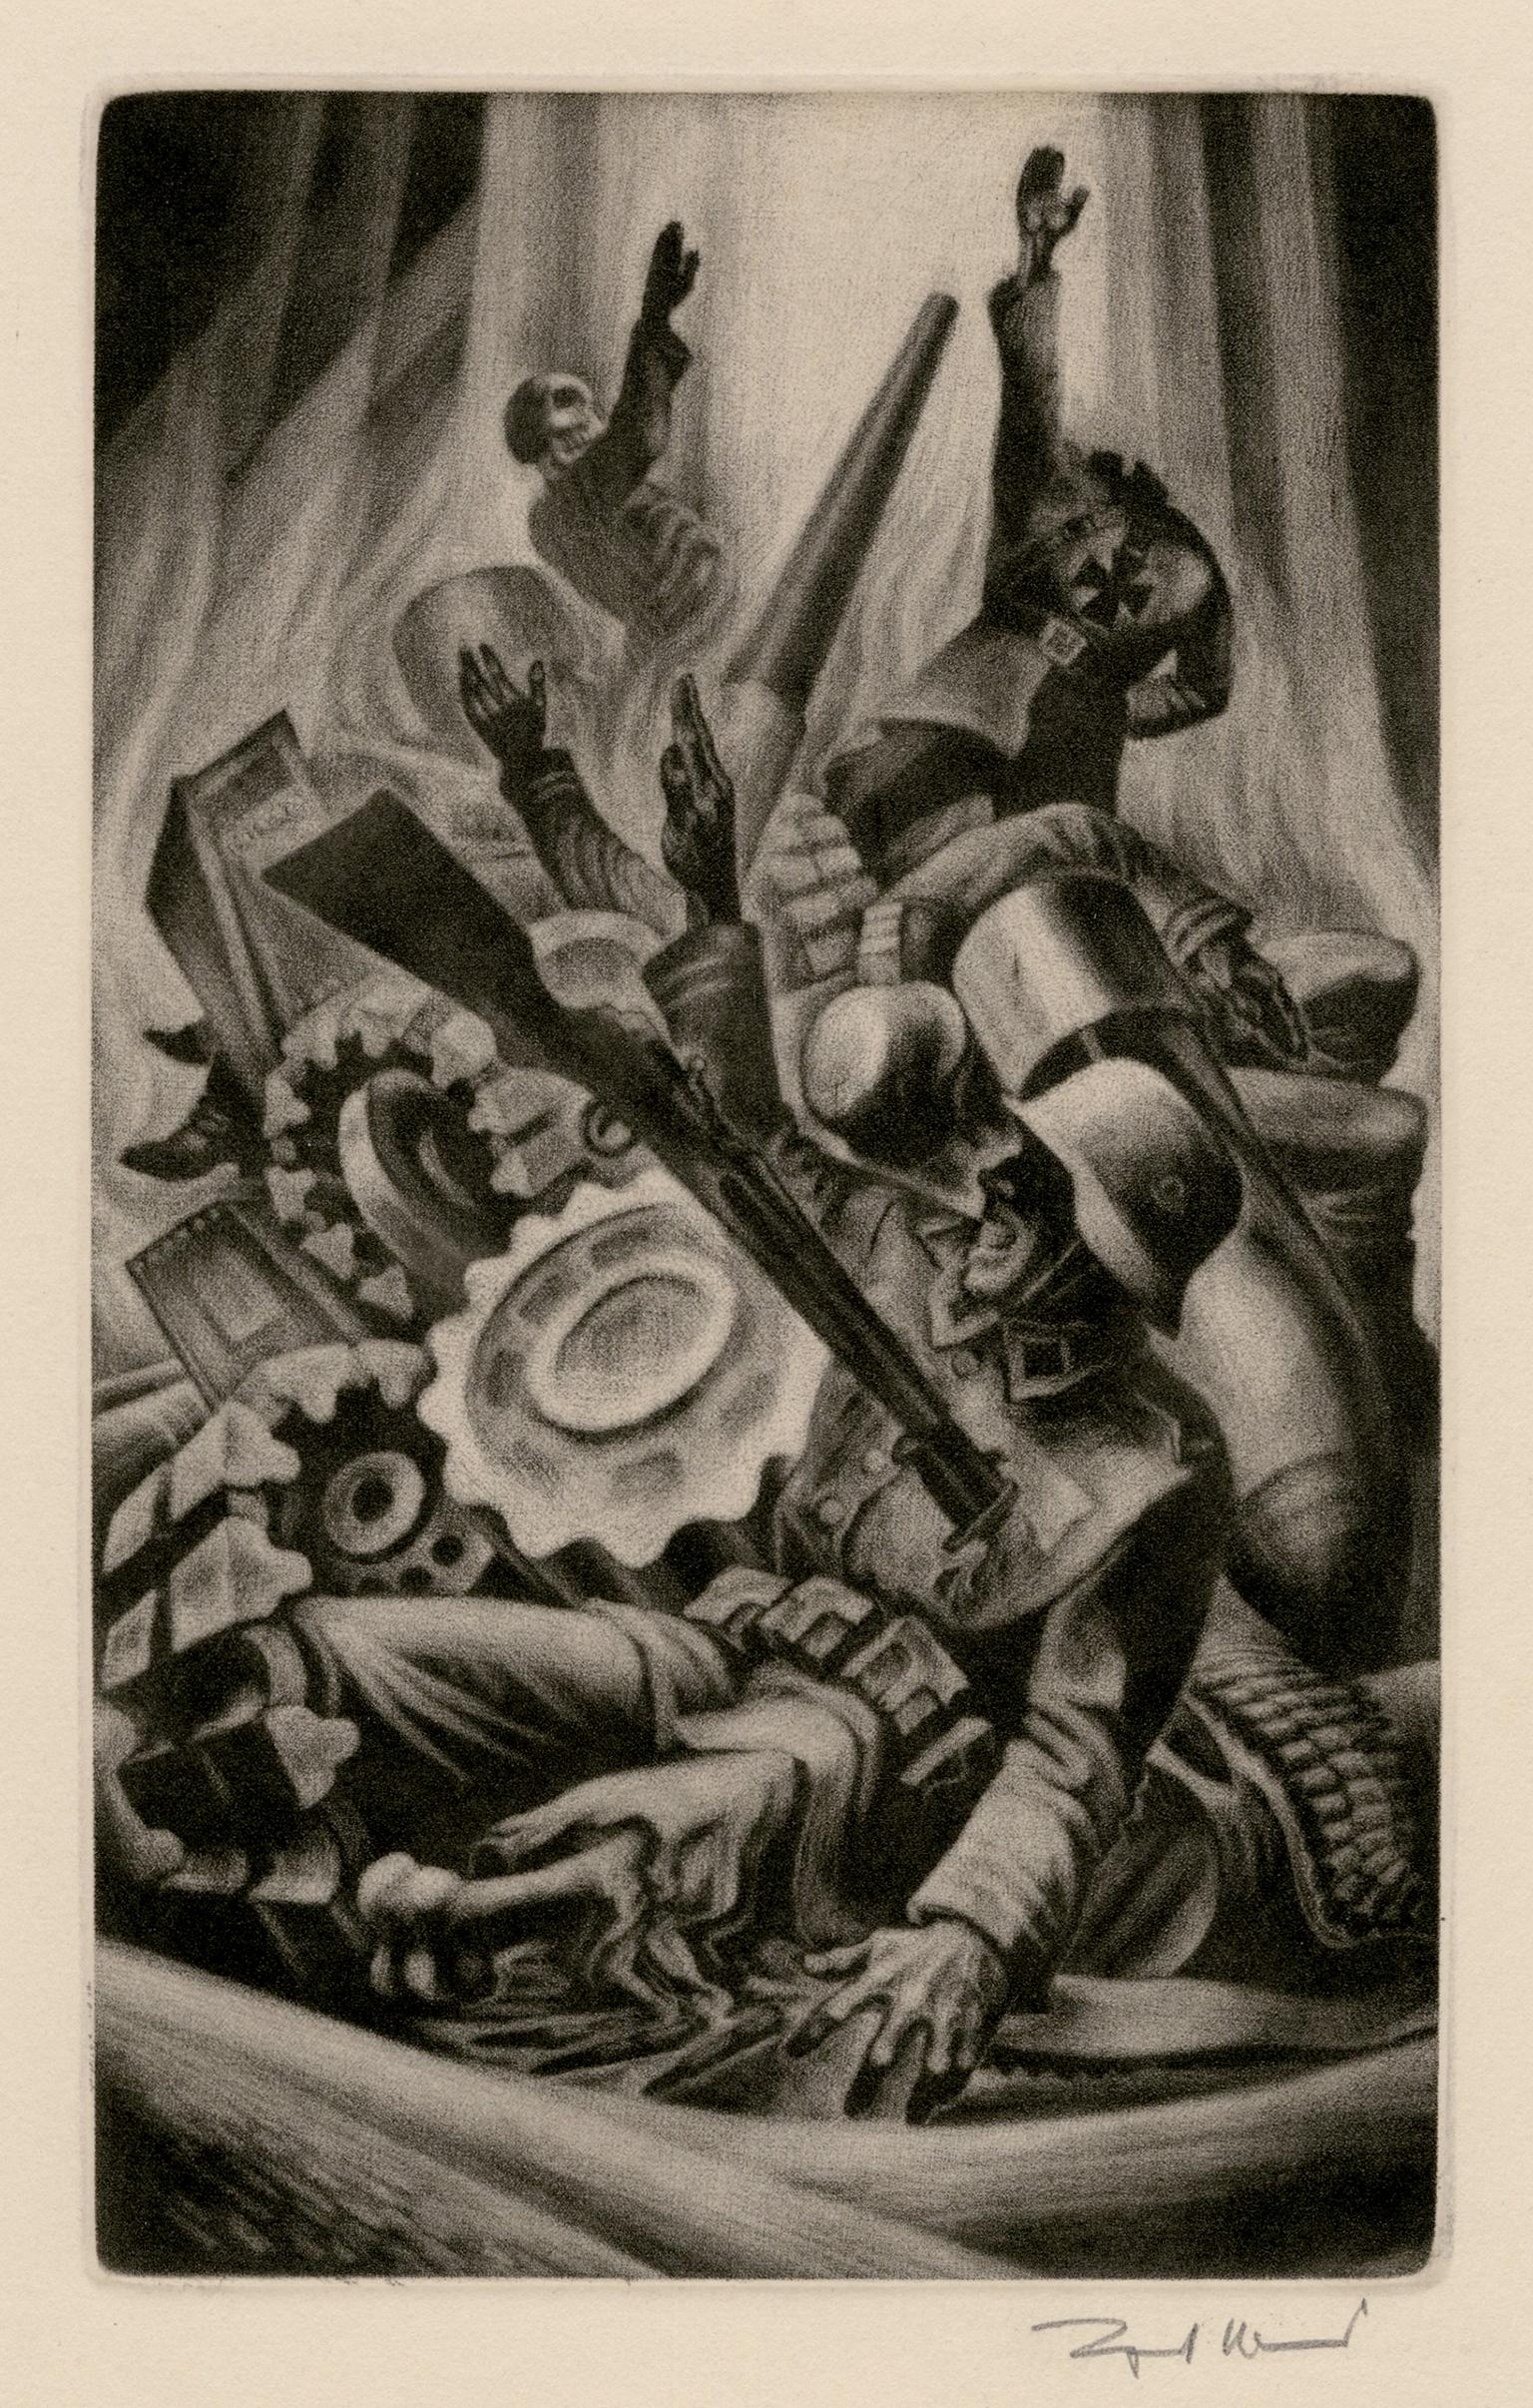 Lynd Ward Figurative Print - 'Dogs of War' from 'In Praise of Folly' — 1940s Graphic Modernism